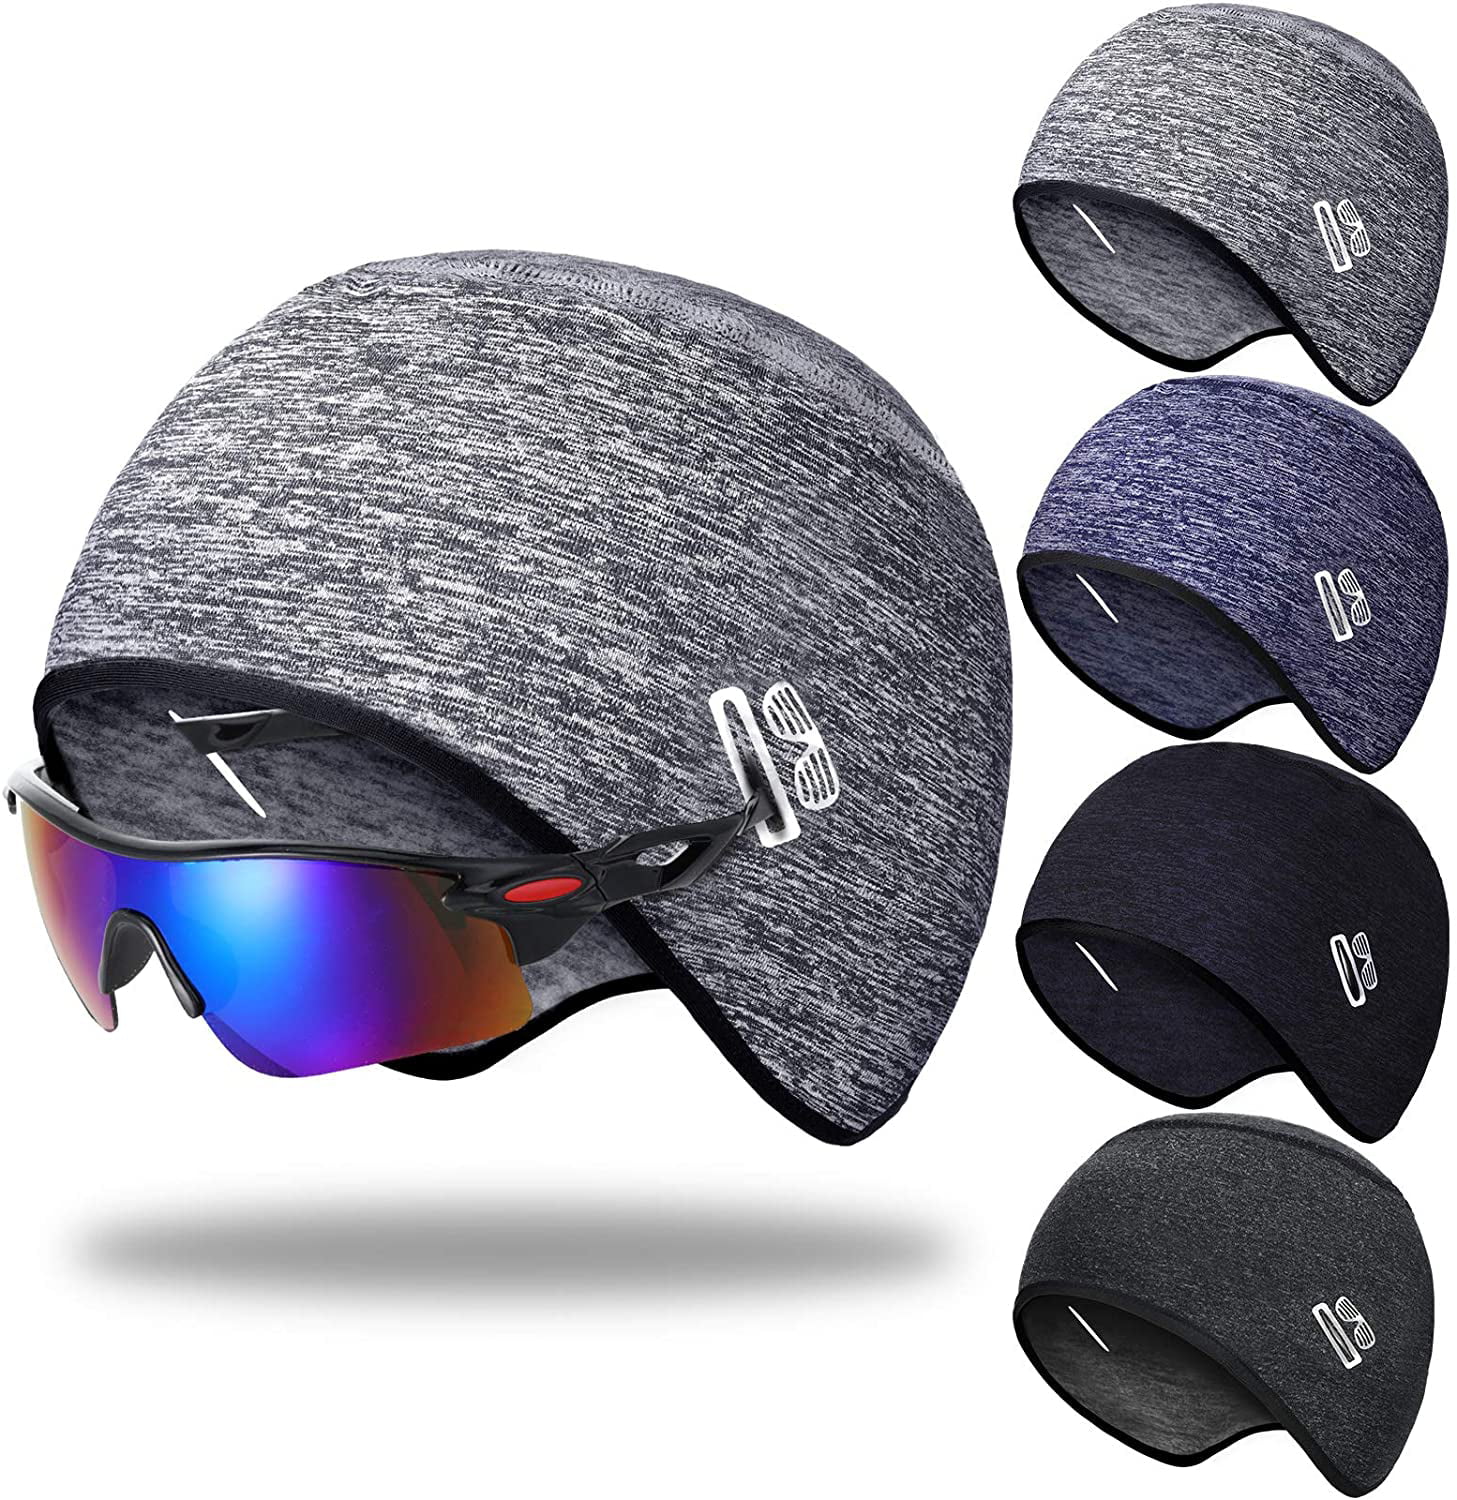 Fits Under Helmets 4 Pieces Men Skull Cap Helmet Liner Thermal Cycling Beanie Cap with Glasses Hole for Men Women